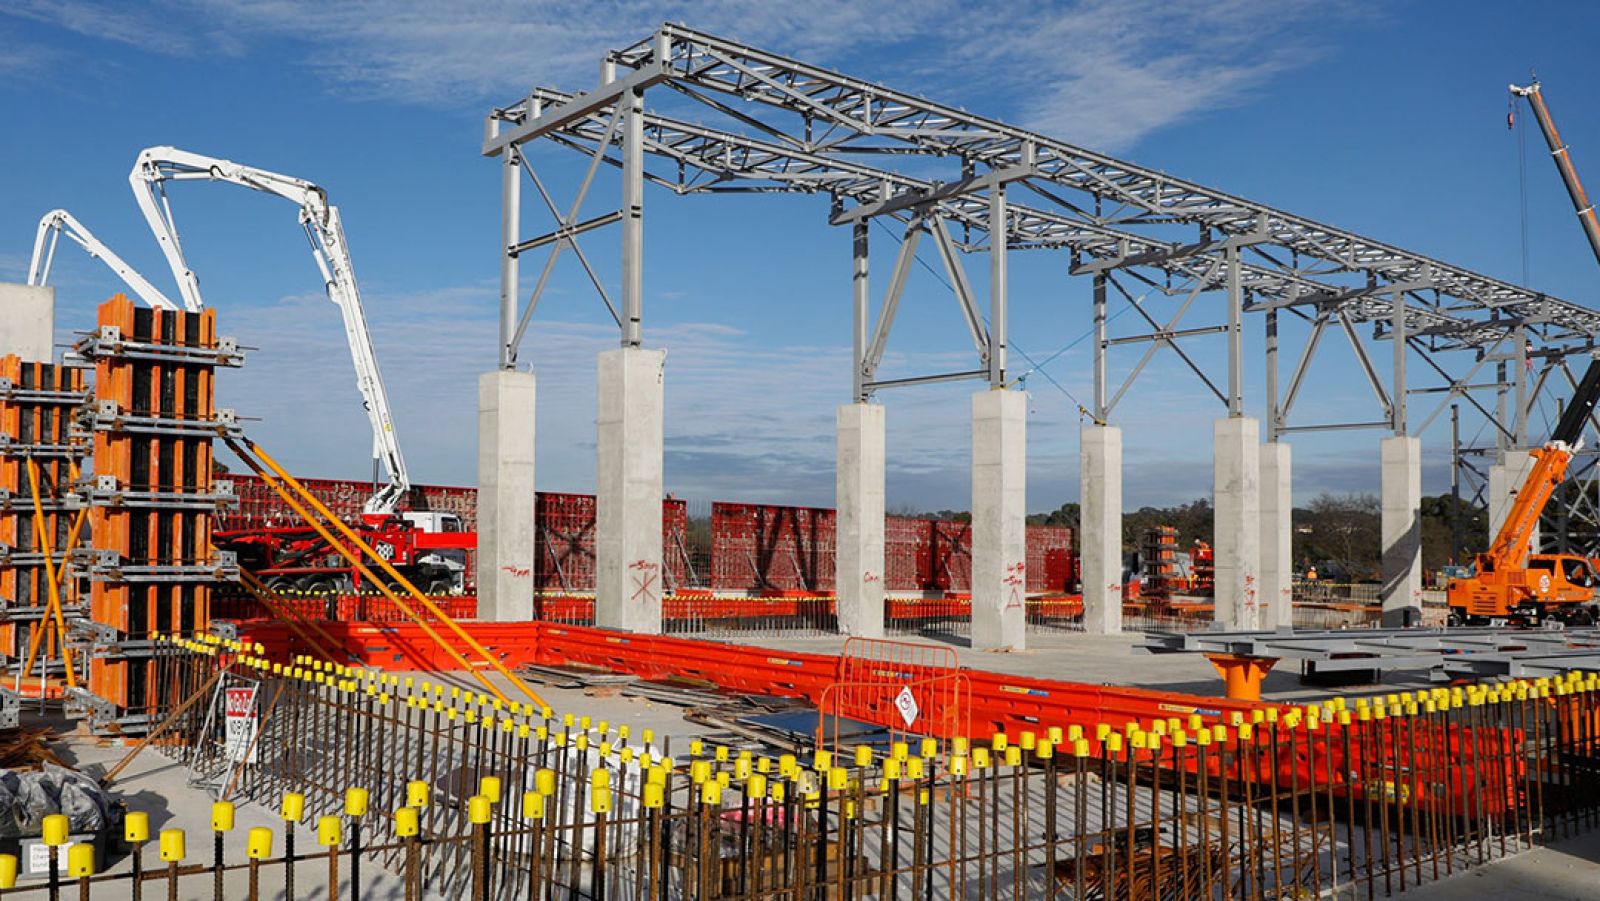 A North East Link construction site where an enclosed conveyor belt is getting built. There are concrete pillars with a metal frame and a crane.